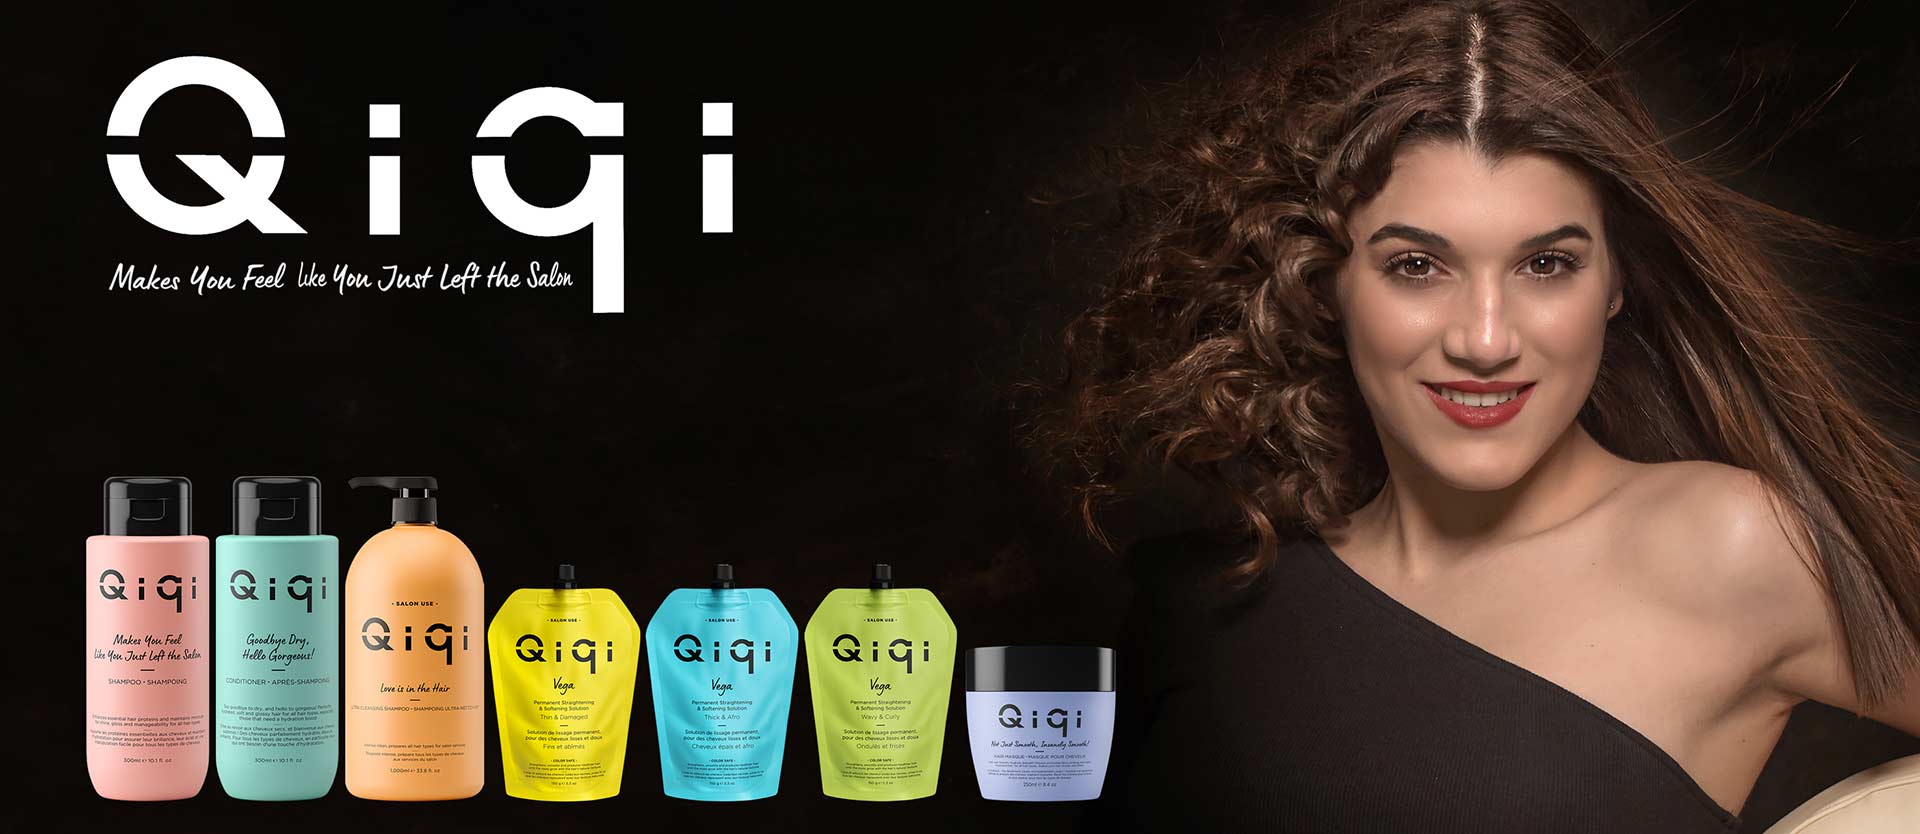 Qiqi: Makes you feel like you just left the salon